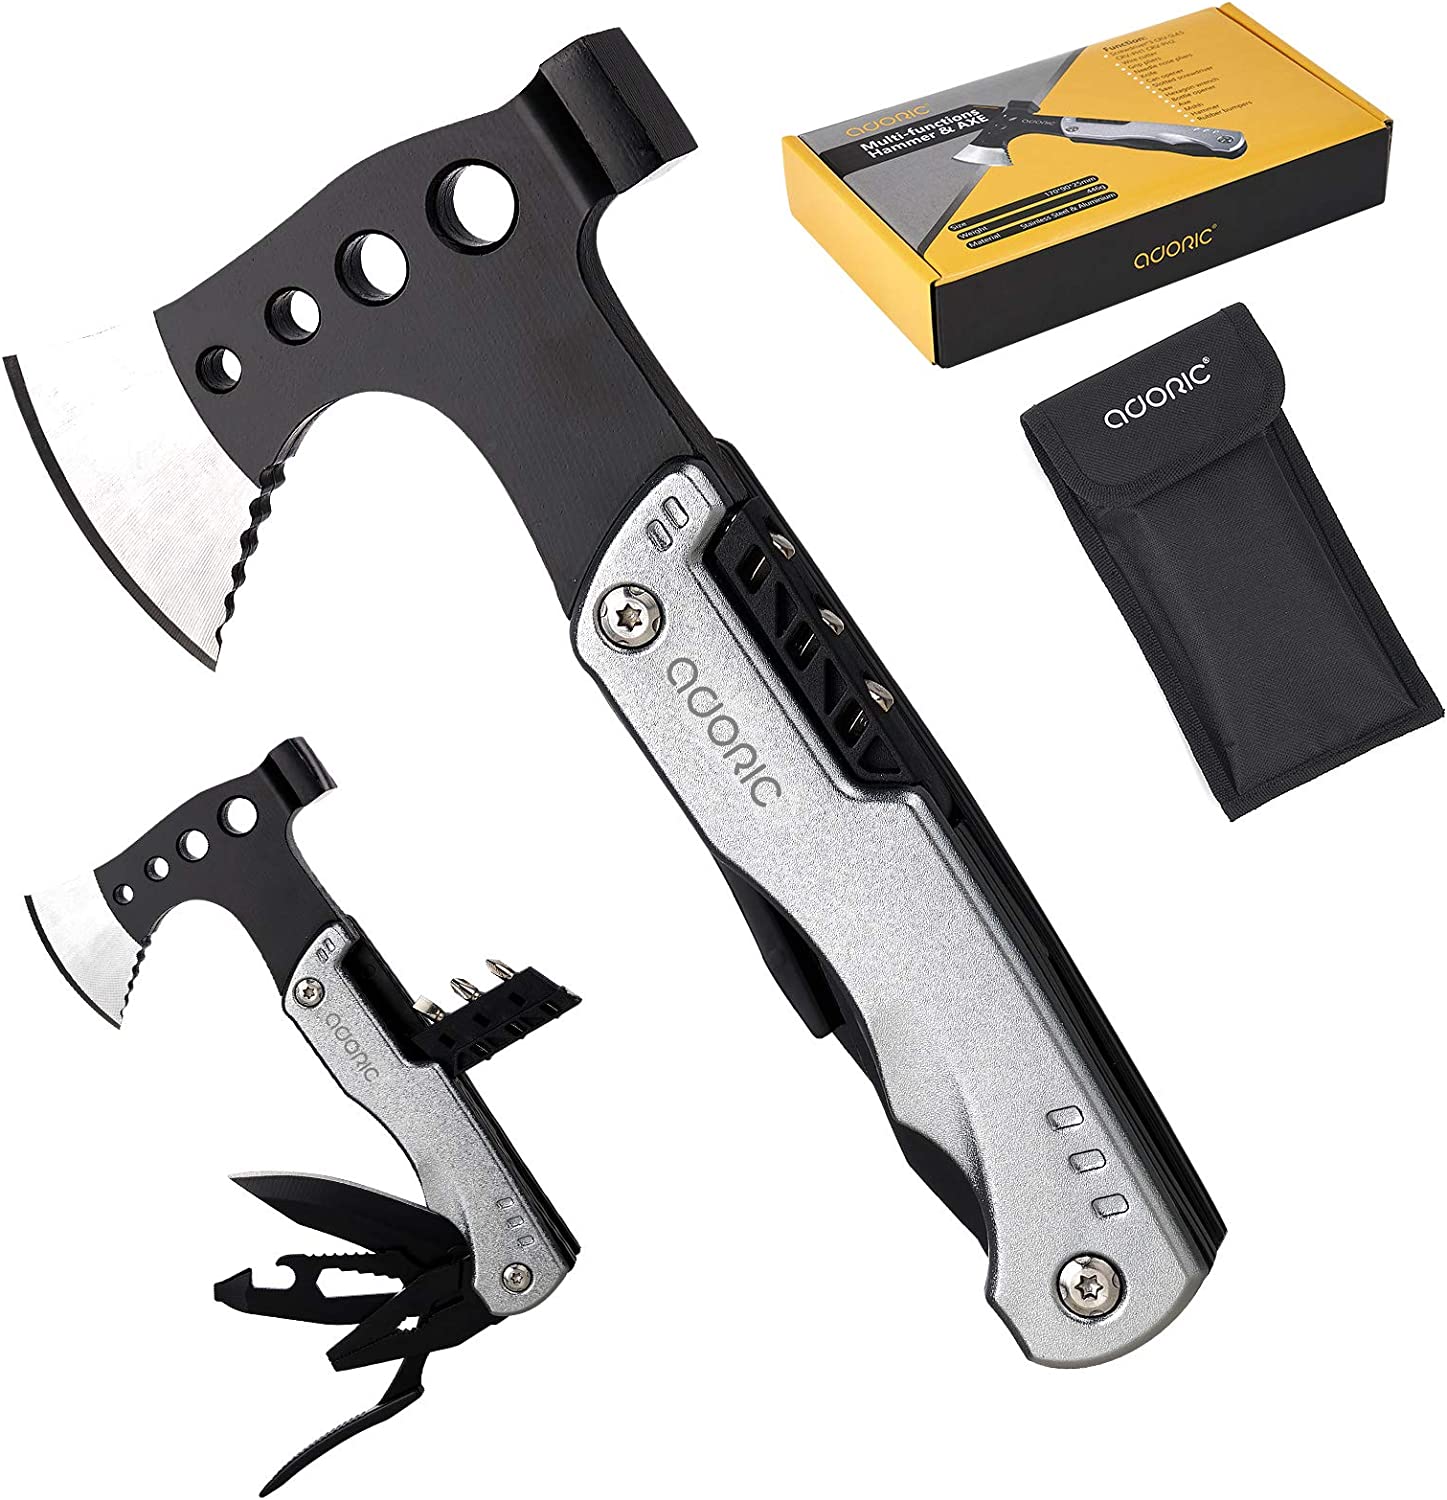 Gifts for Men Dad Christmas, Camping Accessories, Survival Gear and Equipment, Unique Hunting Fishing Gift Ideas for Him Boyfriend Husband Teenage Boys, Multitool Axe, Cool Gadgets